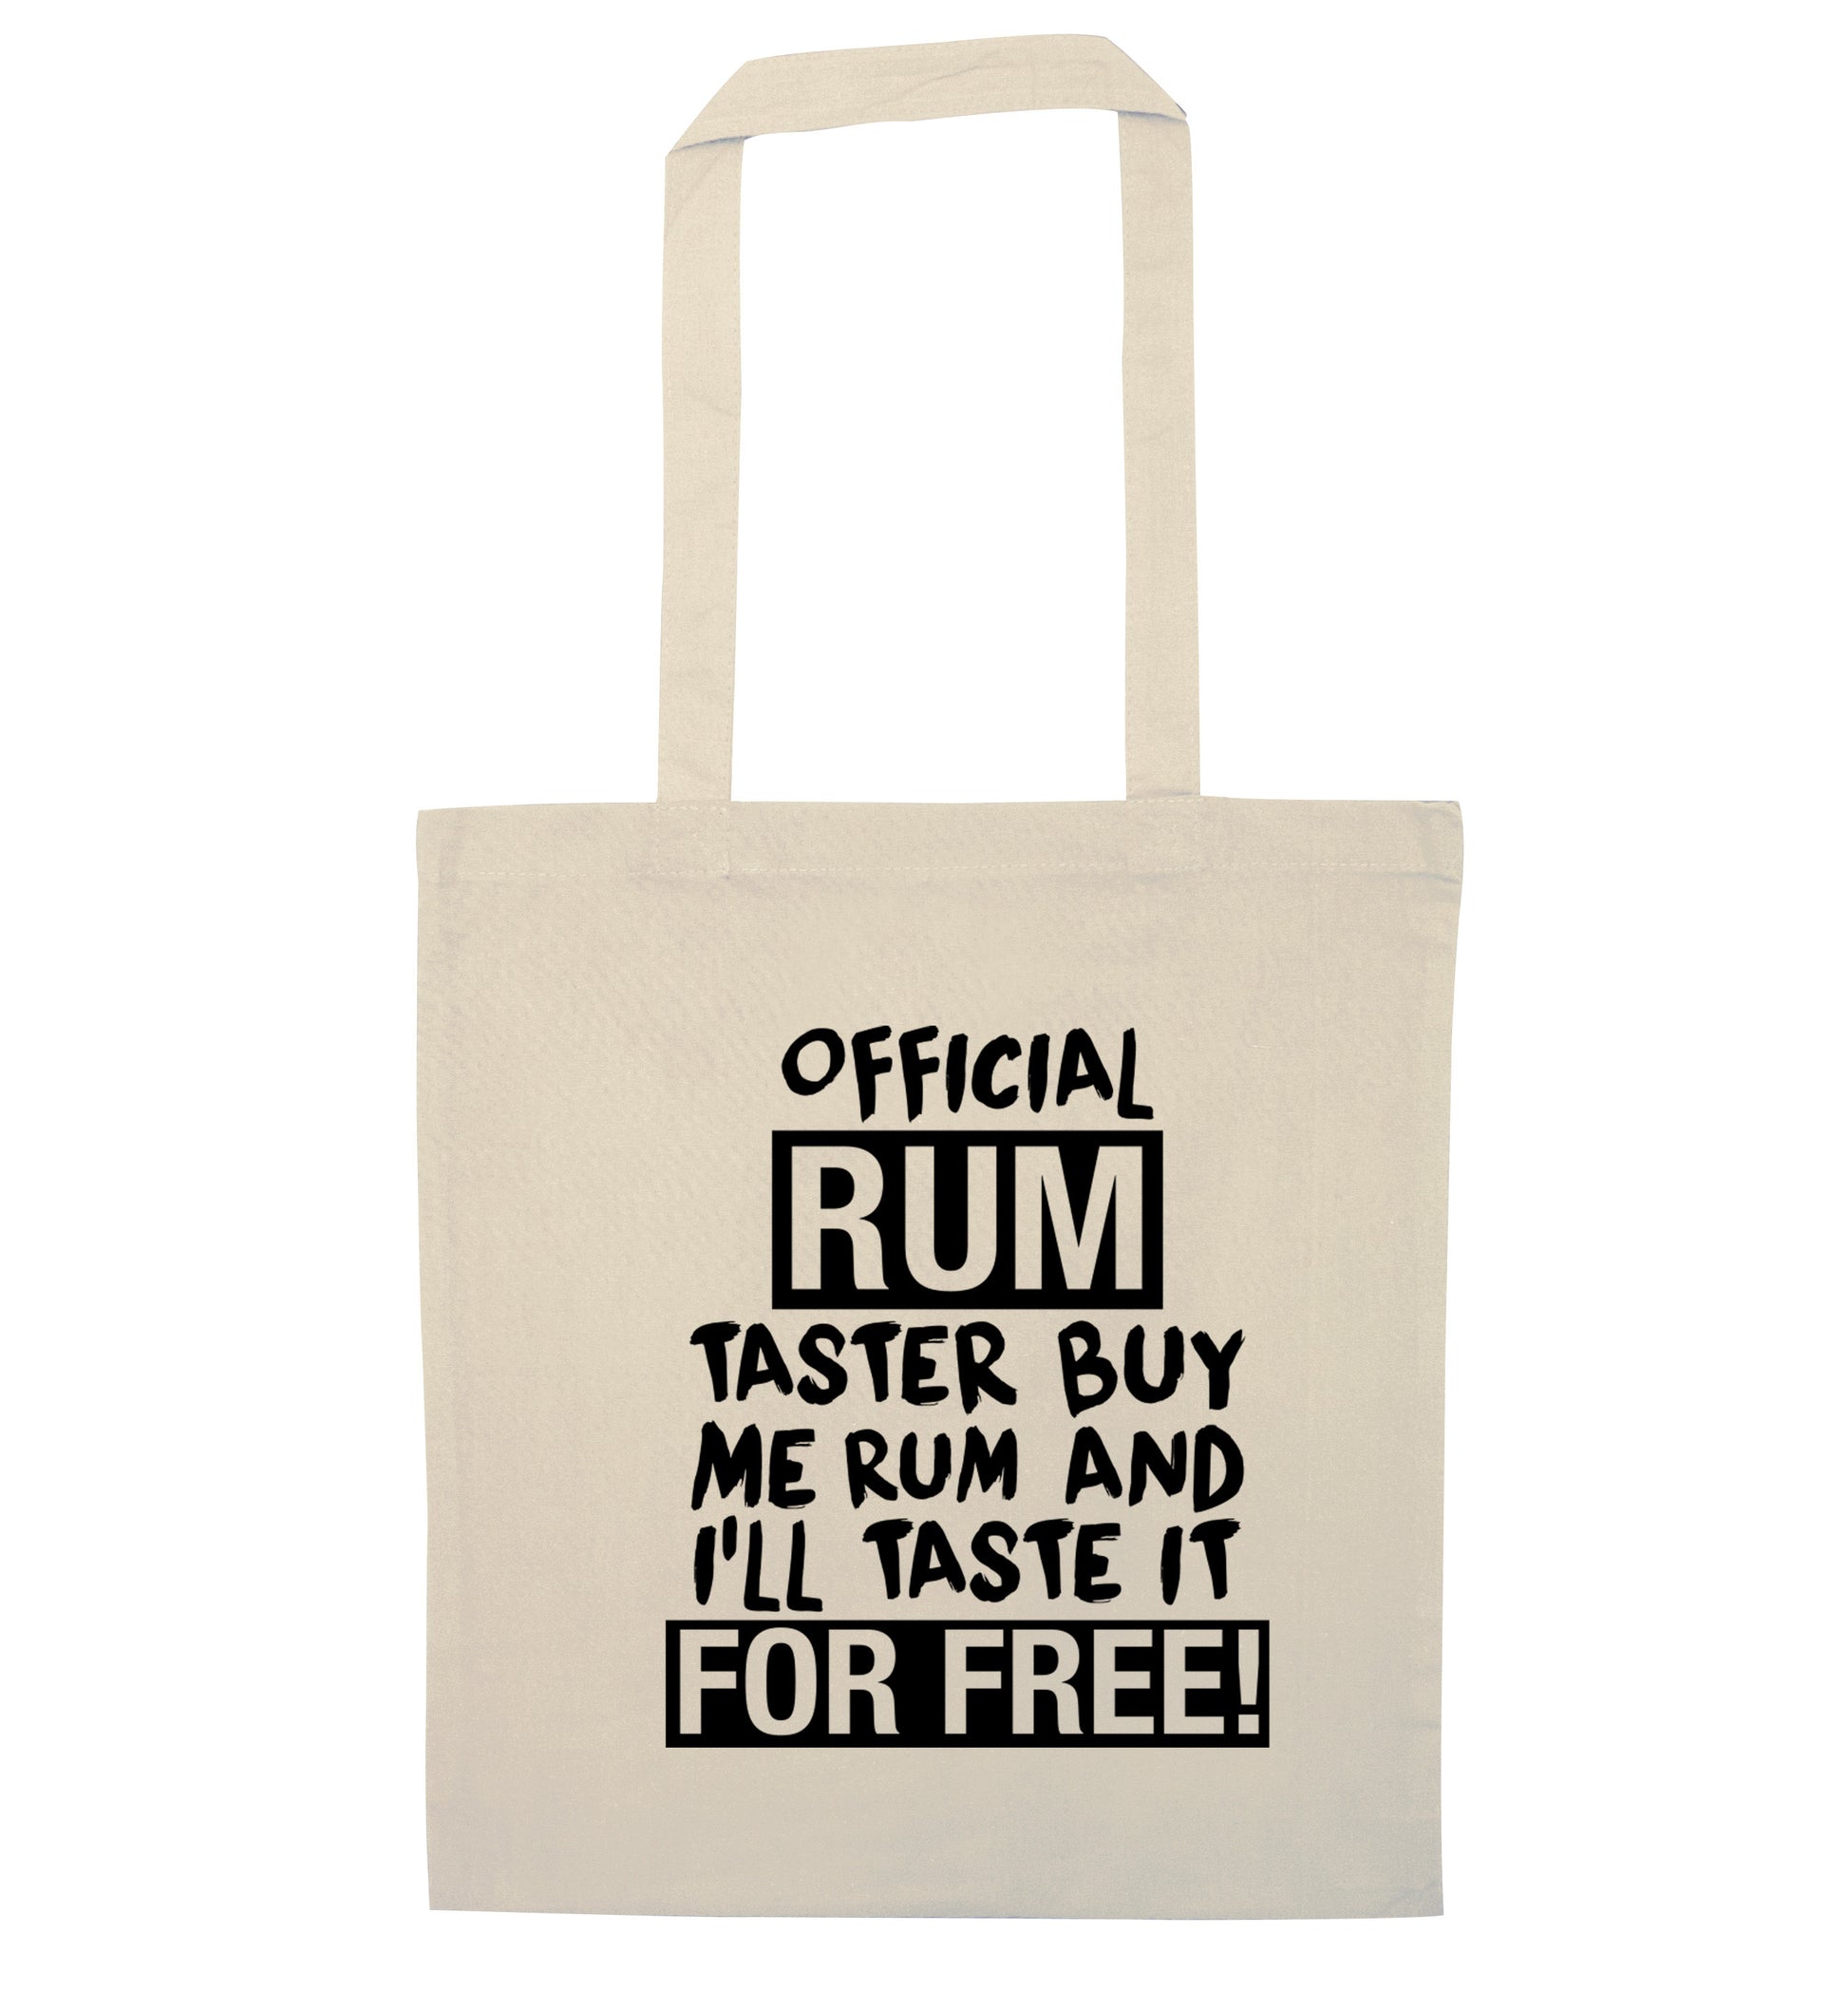 Official rum taster buy me rum and I'll taste it for free natural tote bag